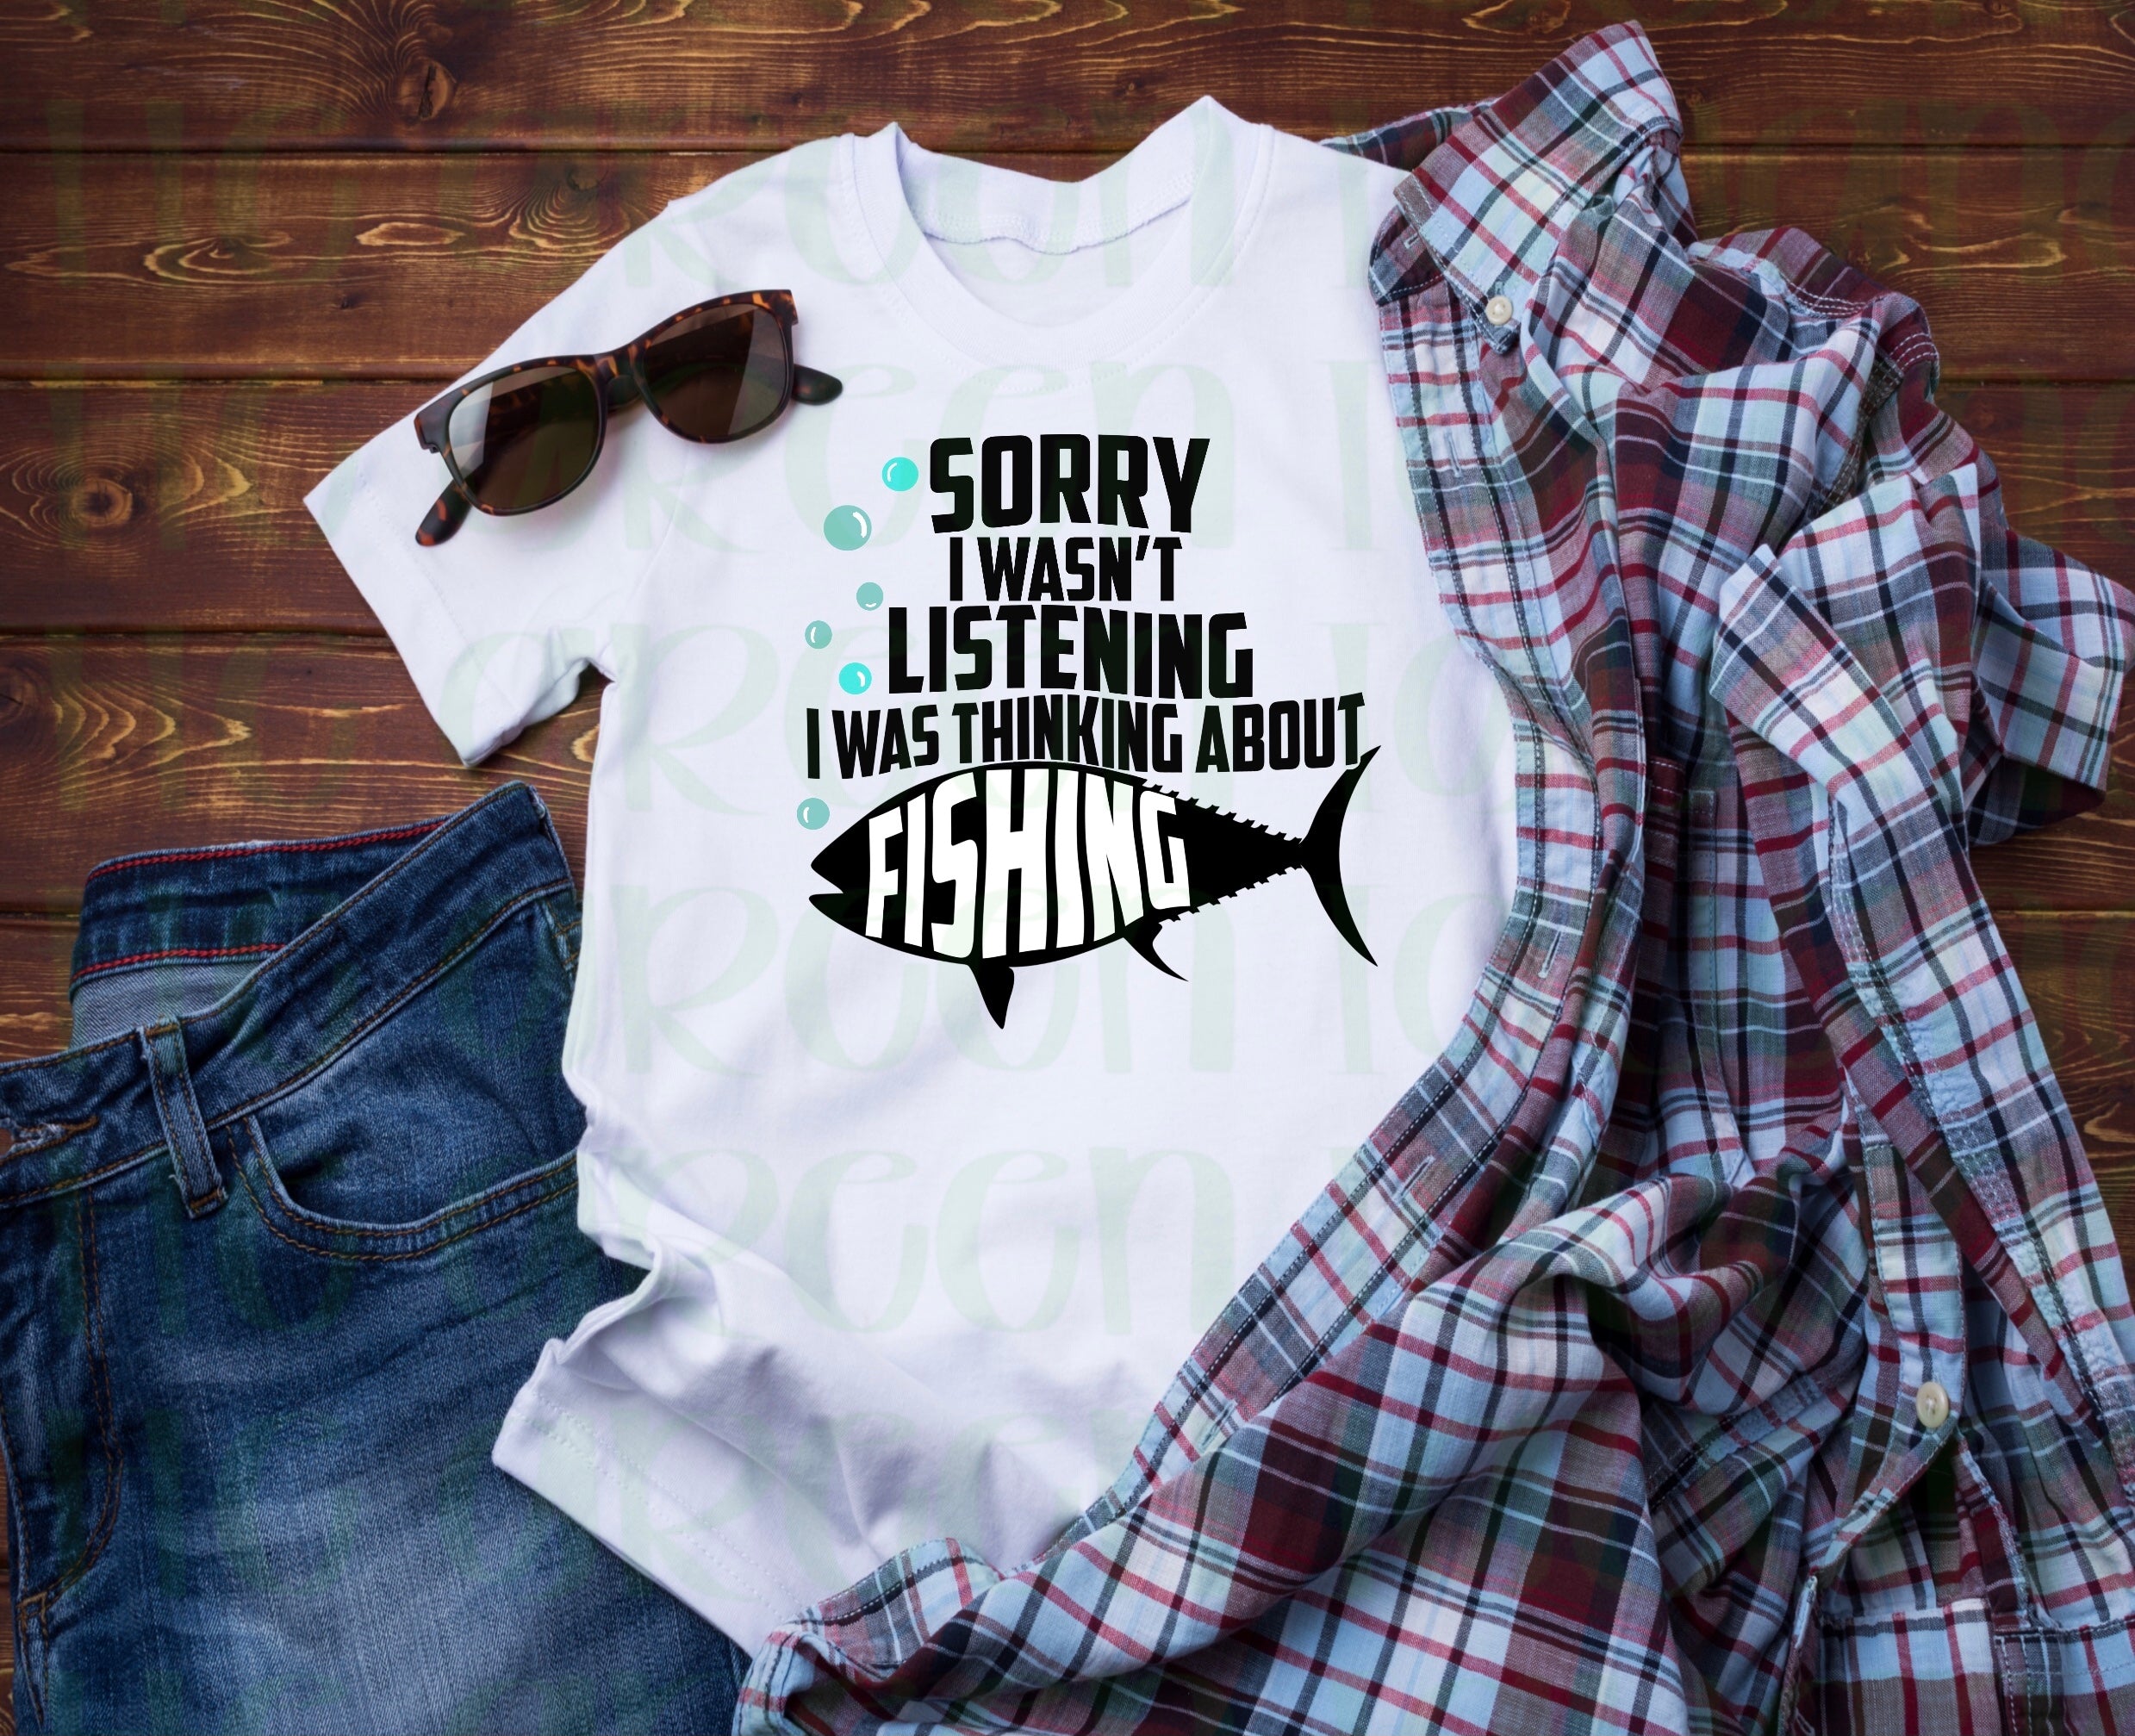 Sorry I wasn’t listening, I was thinking about fishing - DIGITAL